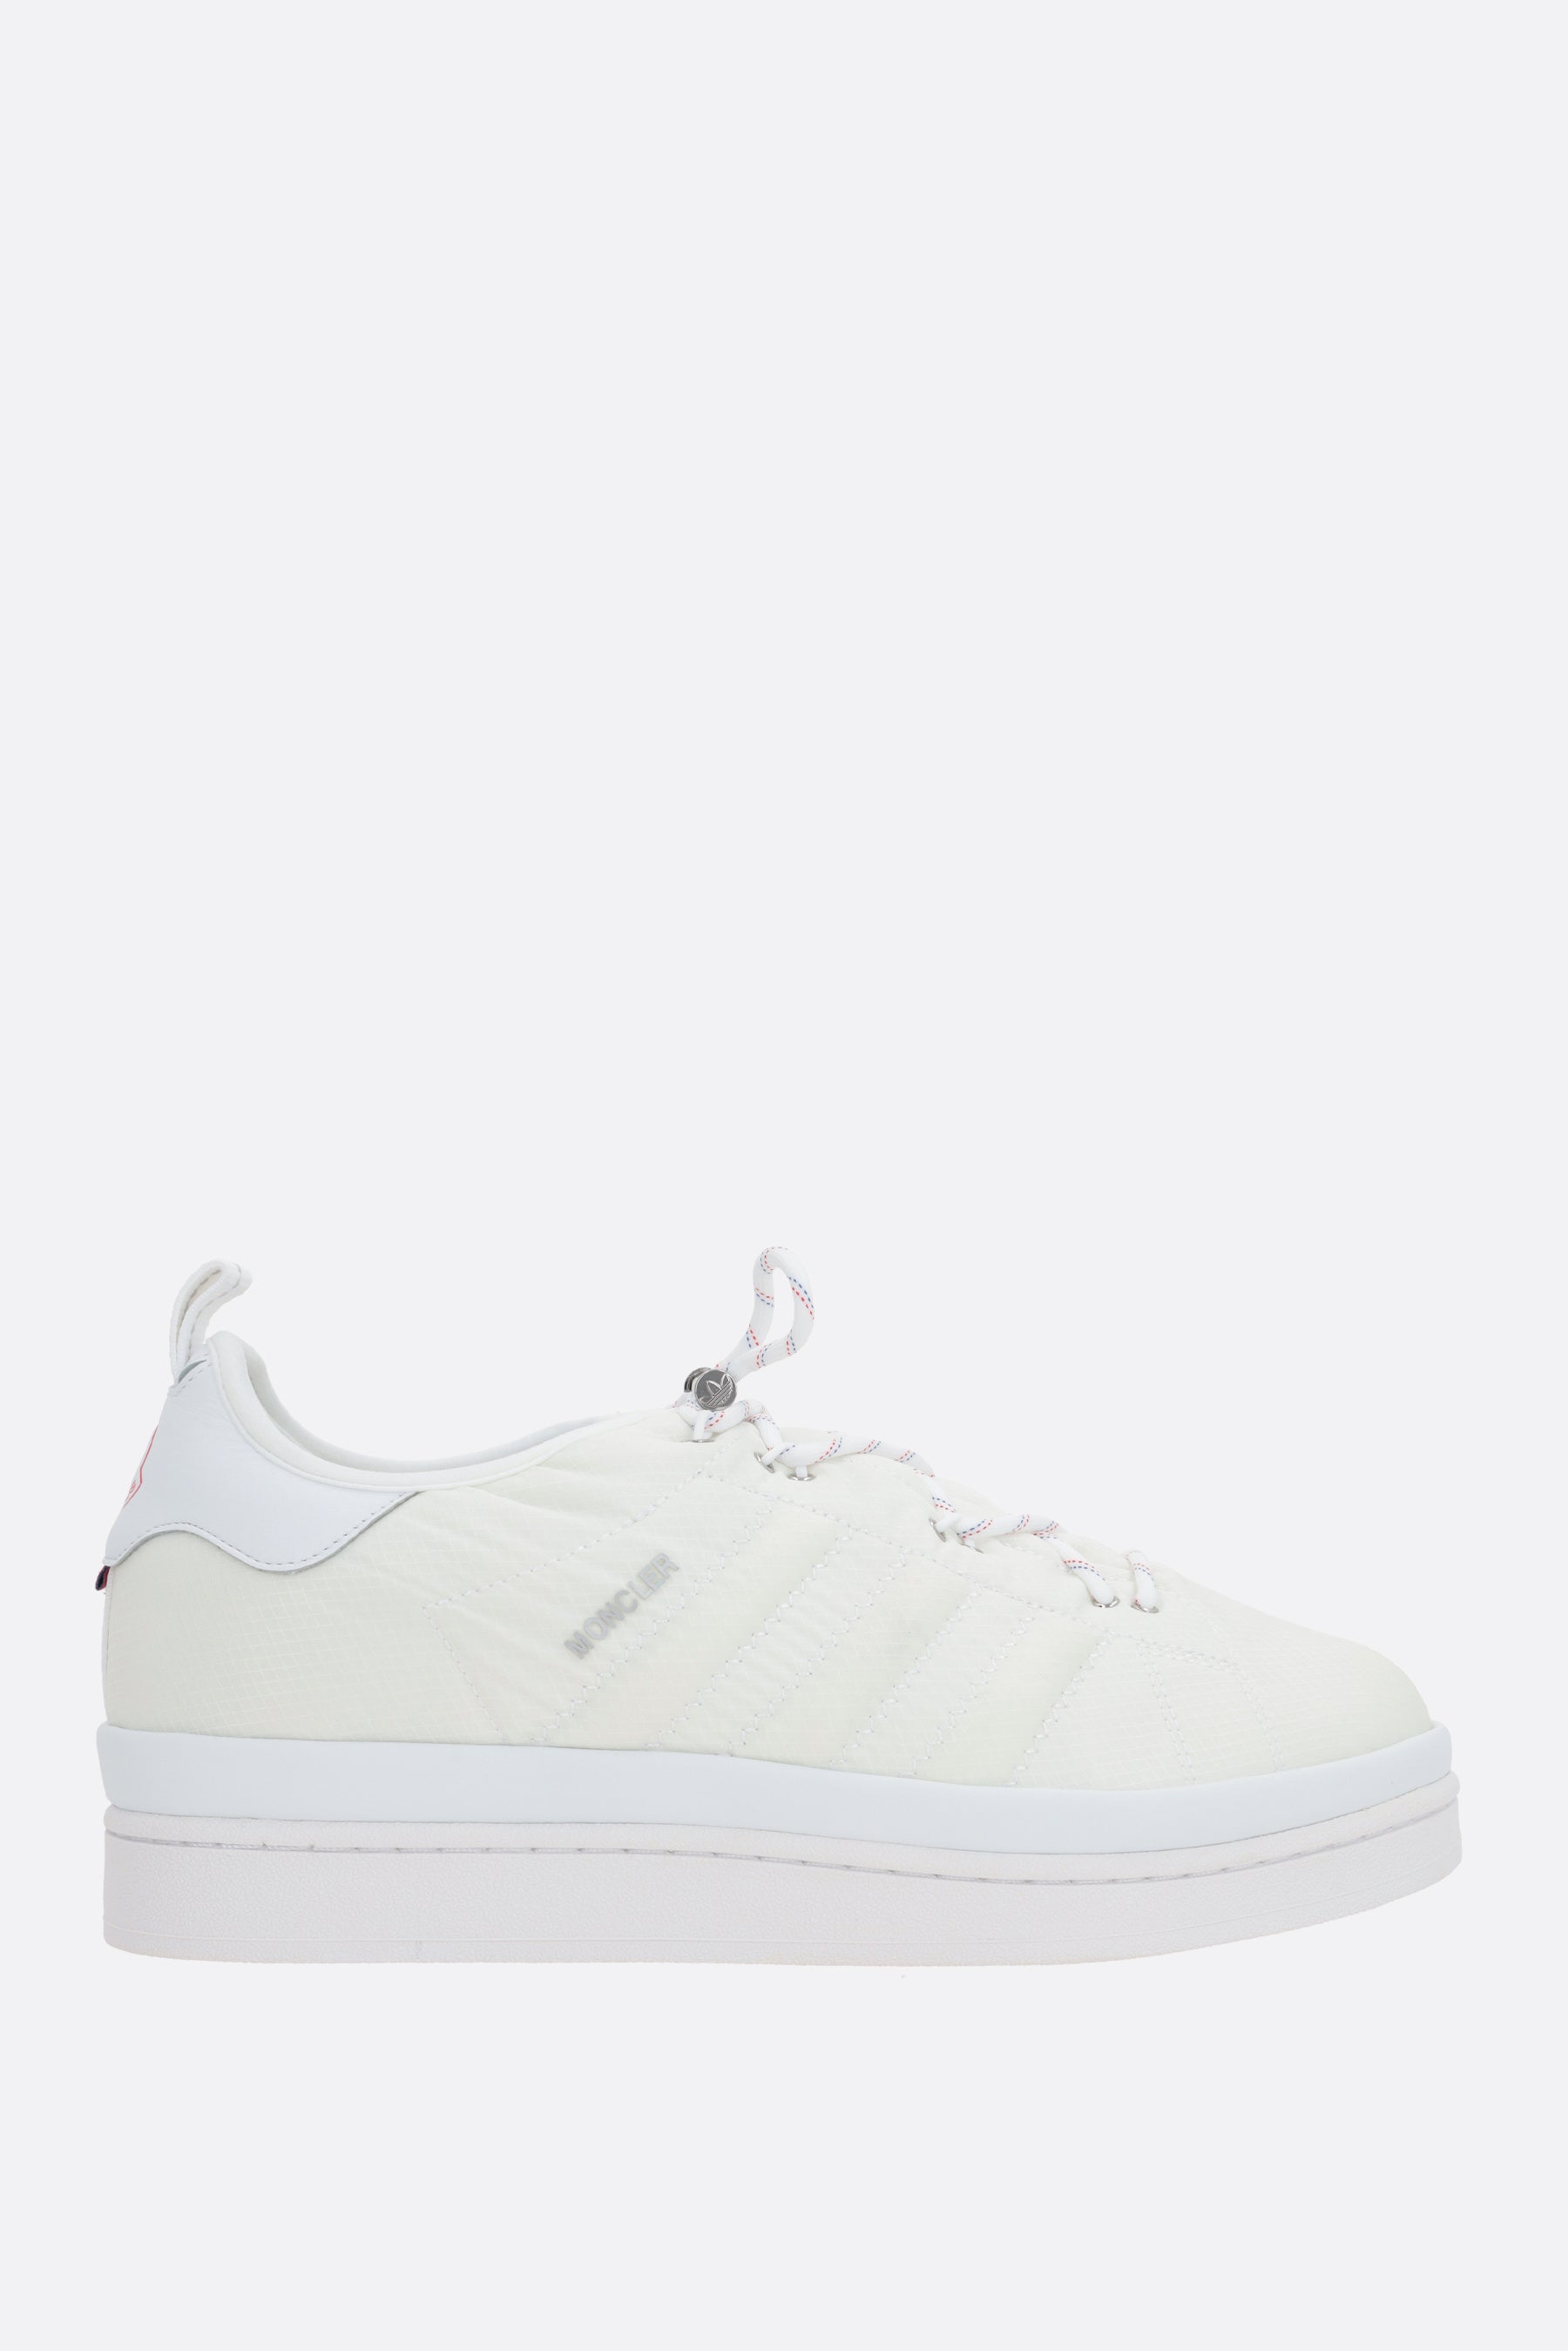 Moncler Campus ripstop nylon sneakers